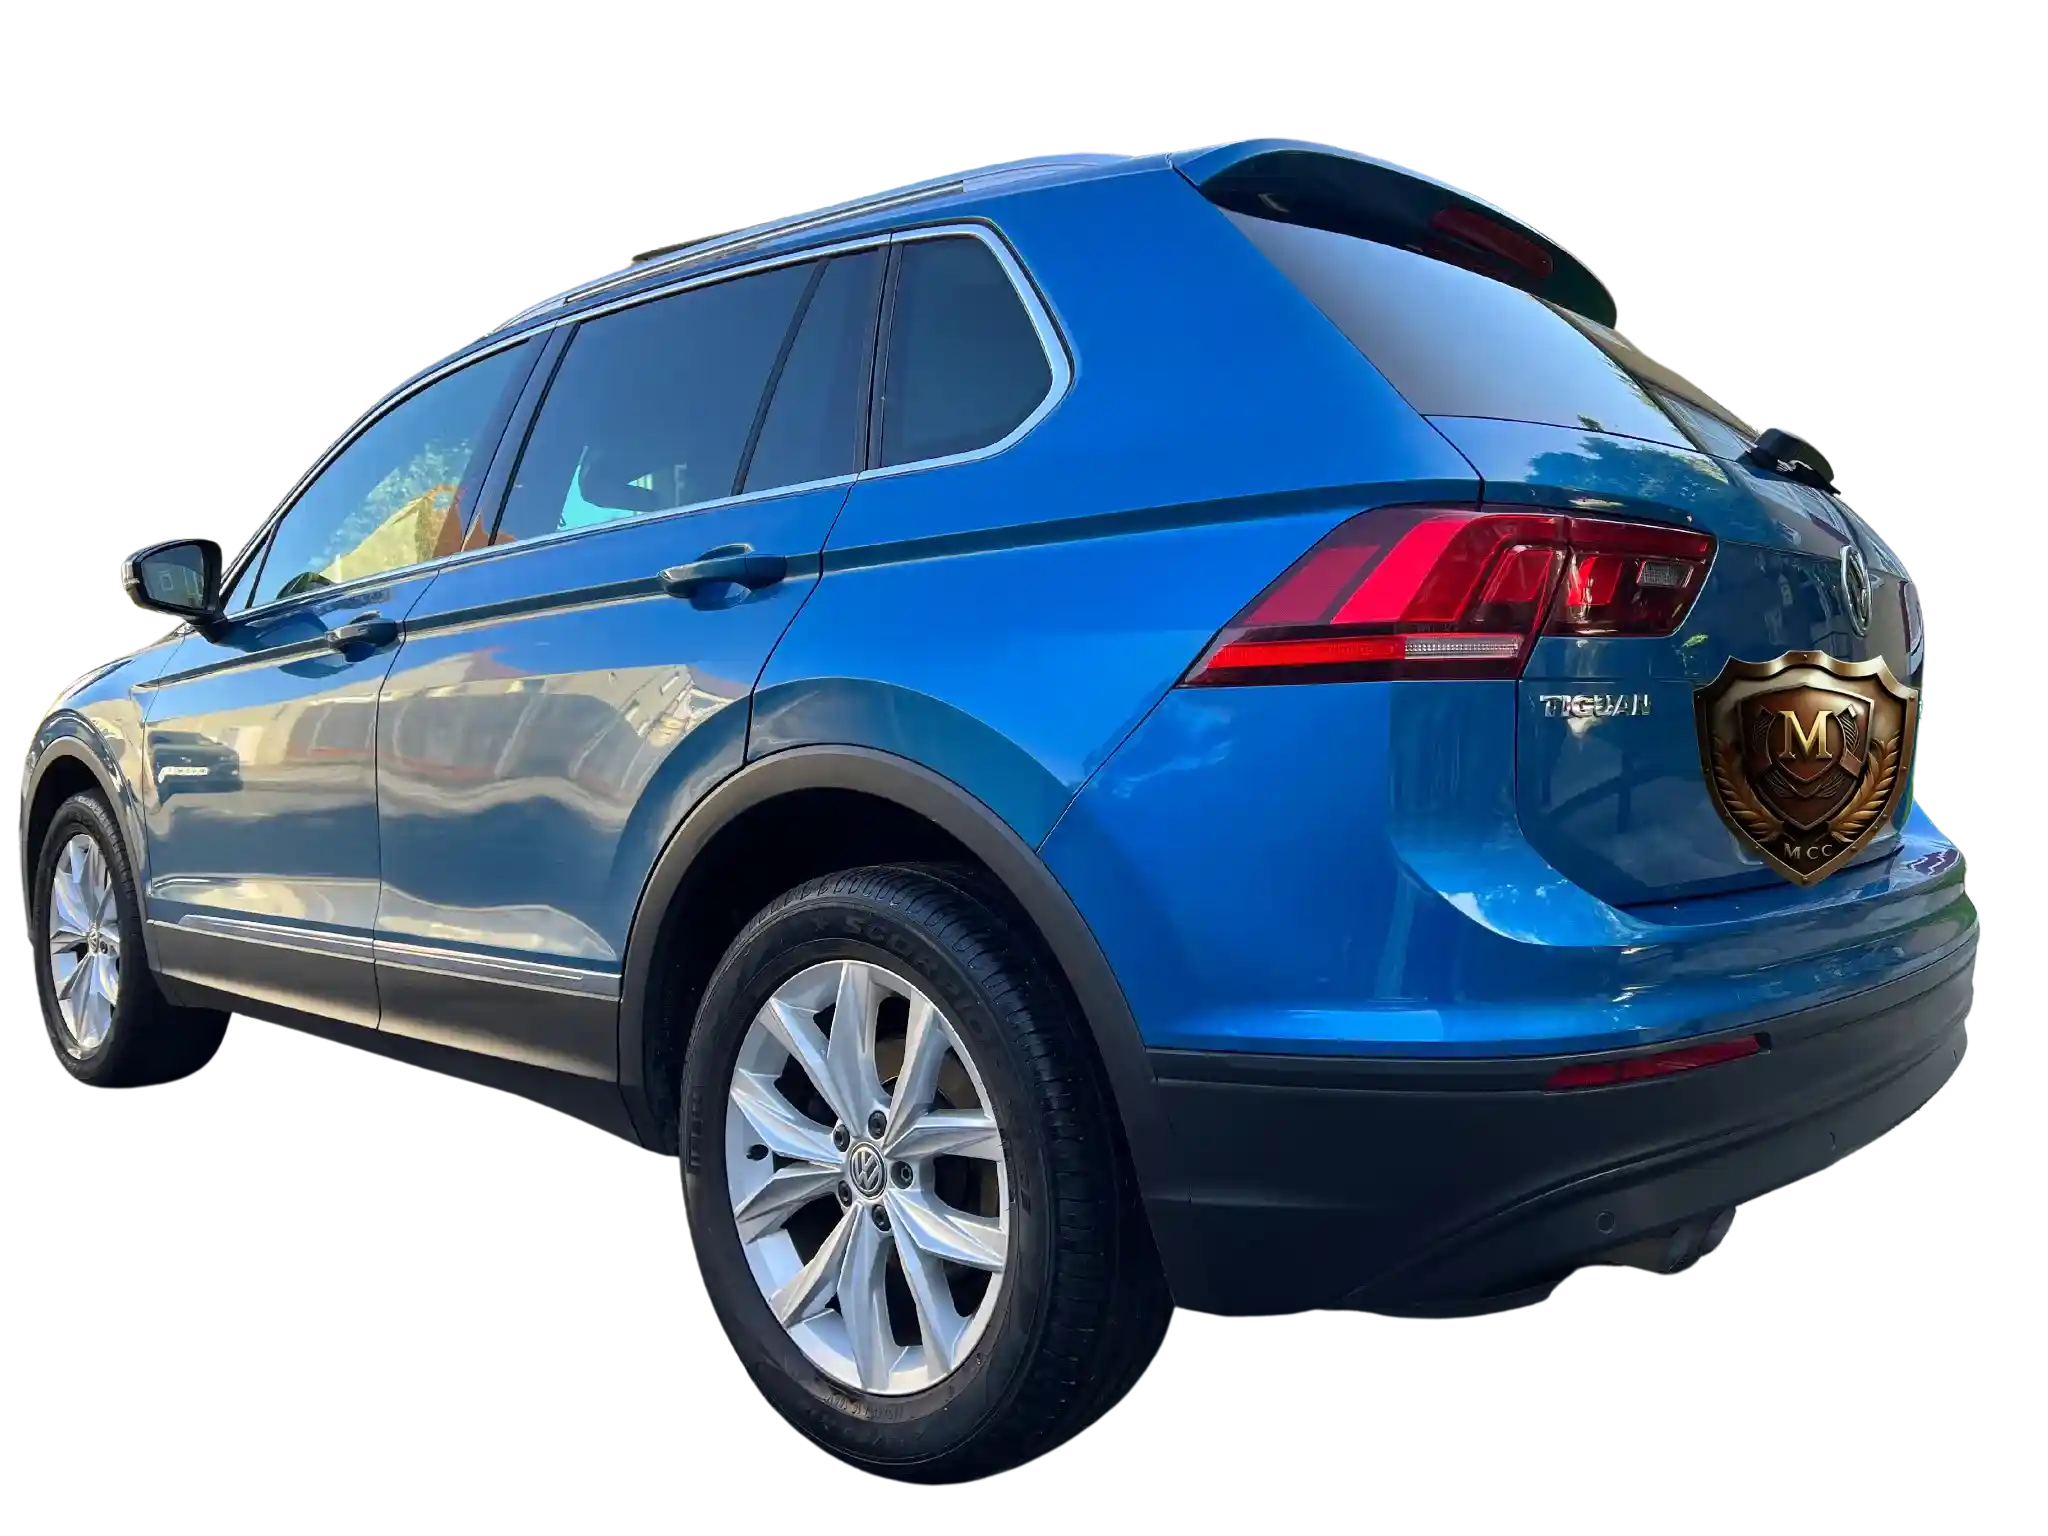 Eco-friendly waterless valeting of a Volkswagen Tiguan 4Motion in Twickenham, enhancing its rugged elegance and reflecting corporate environmental values.